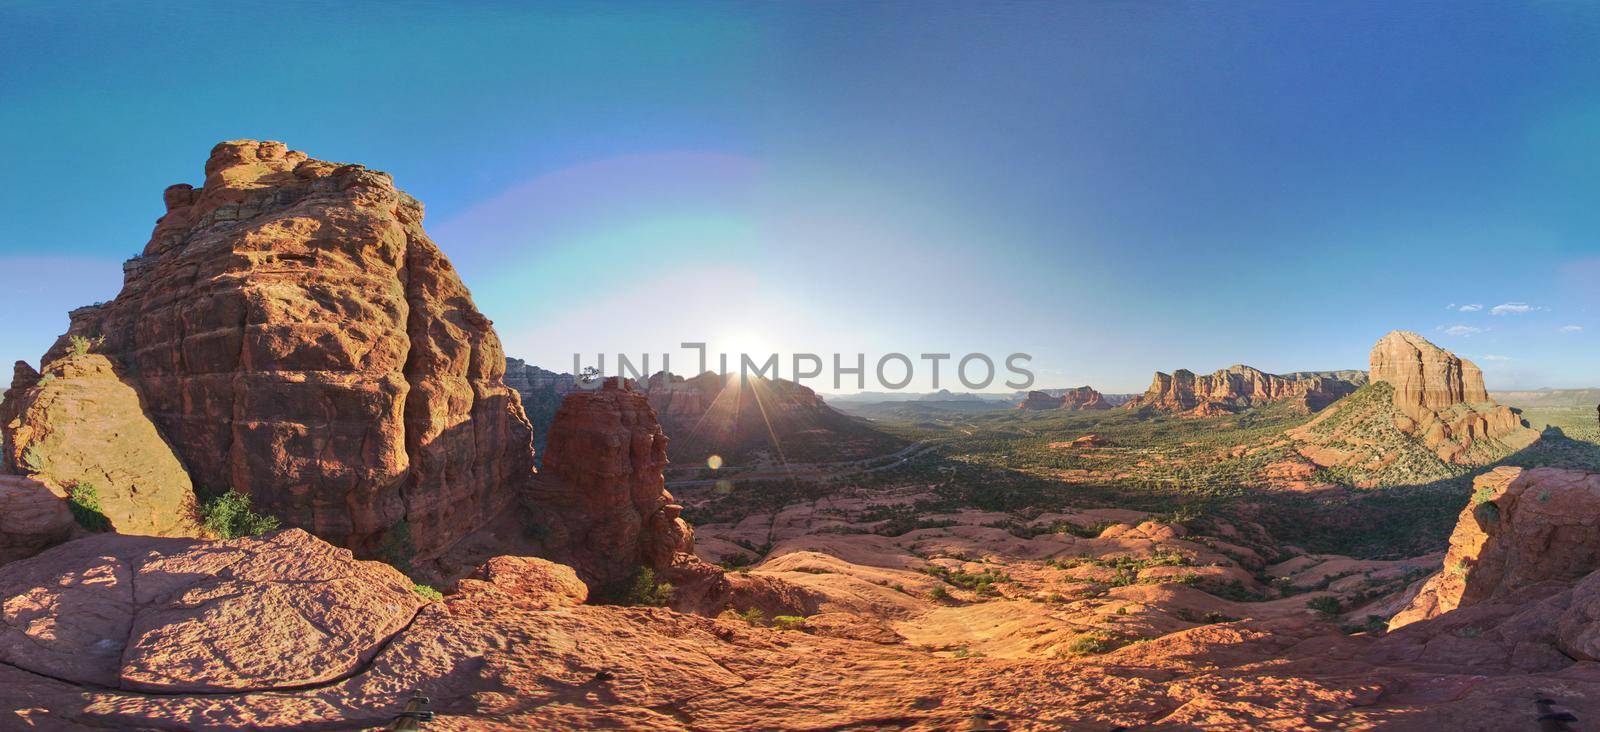 Image of Panorama hiking in mountain at top of red rock desert